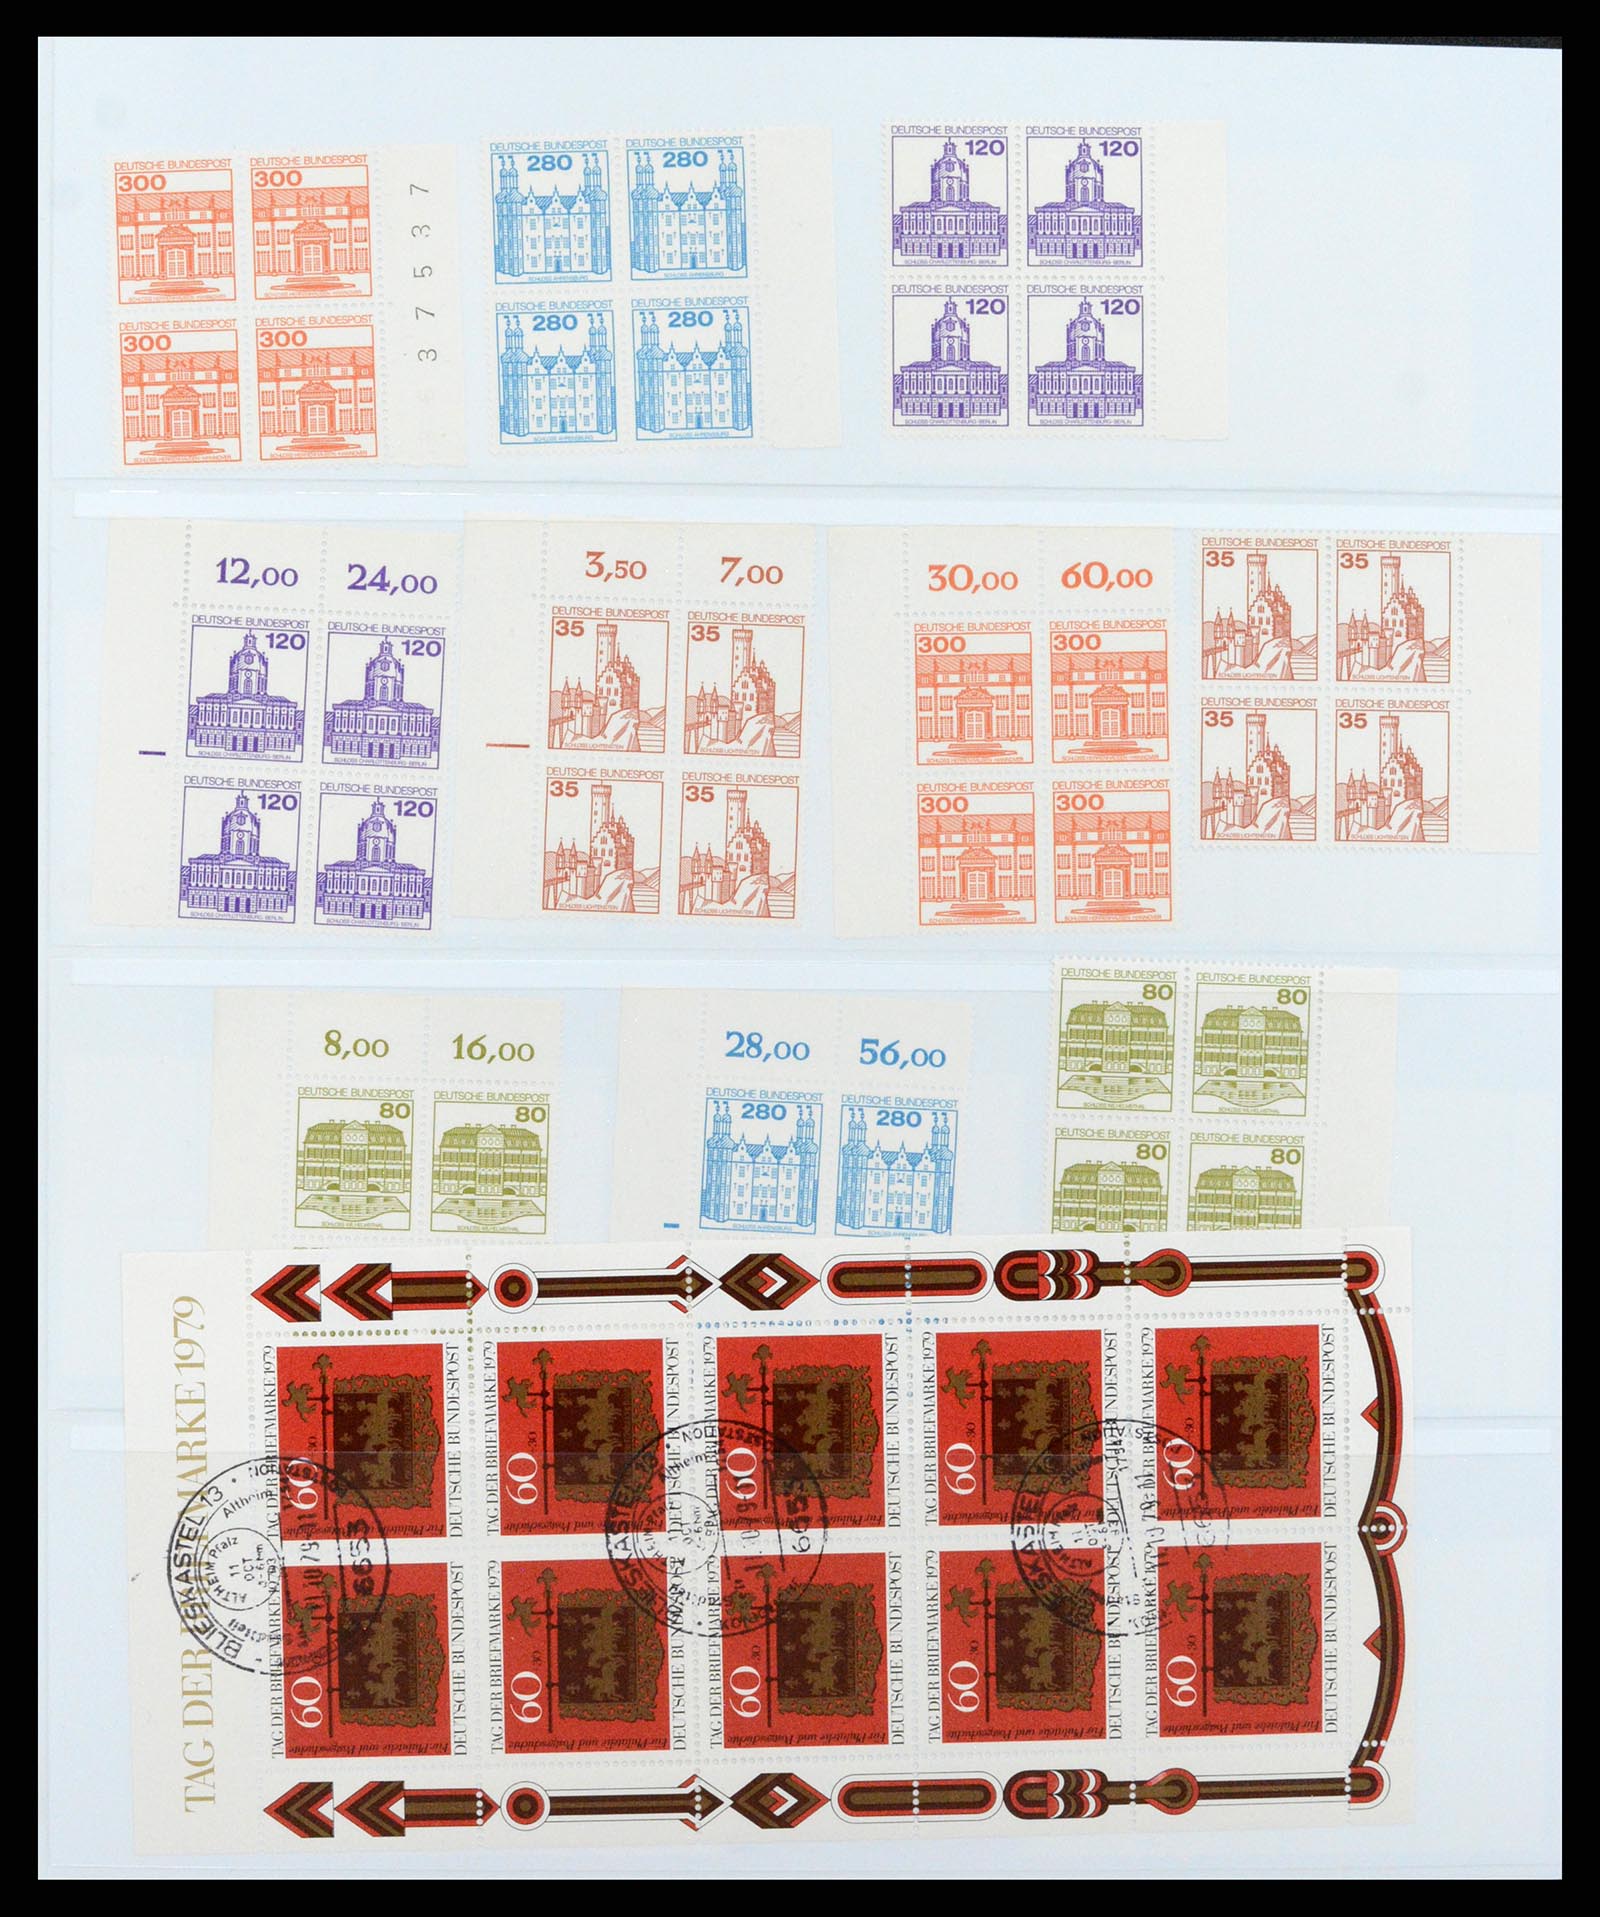 37336 020 - Stamp collection 37336 Bundespost combinations 1955-1980.